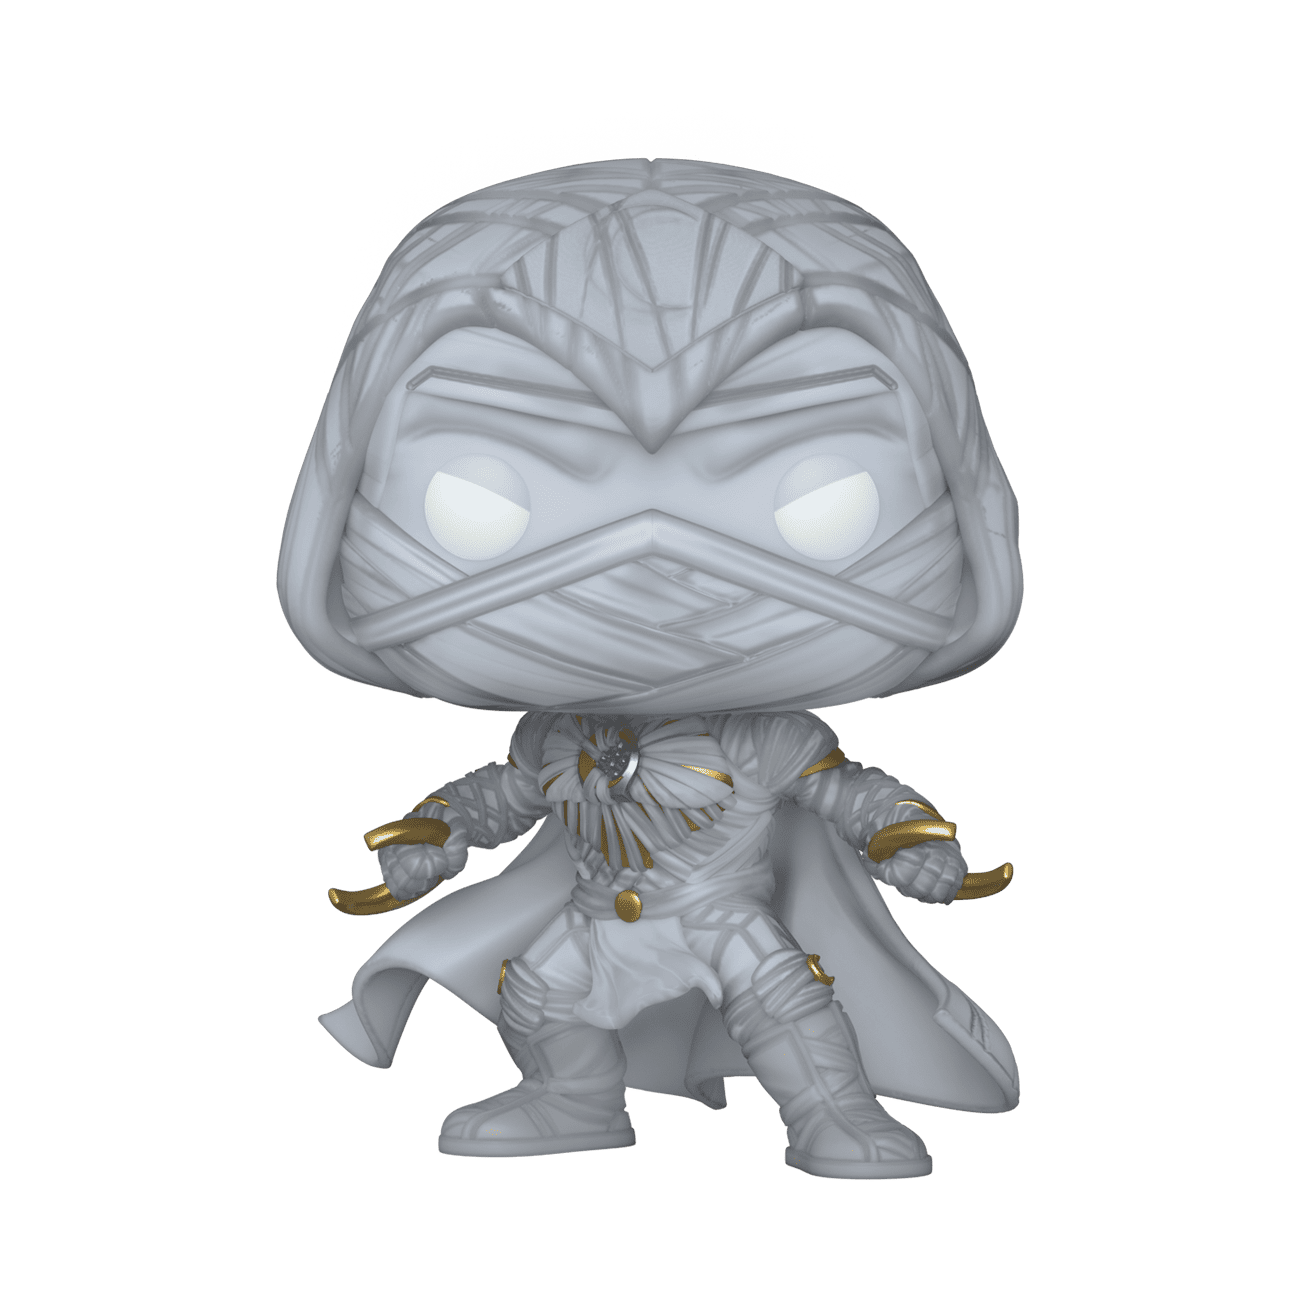 At vise Hysterisk leksikon Buy Pop! Moon Knight with Weapon at Funko.